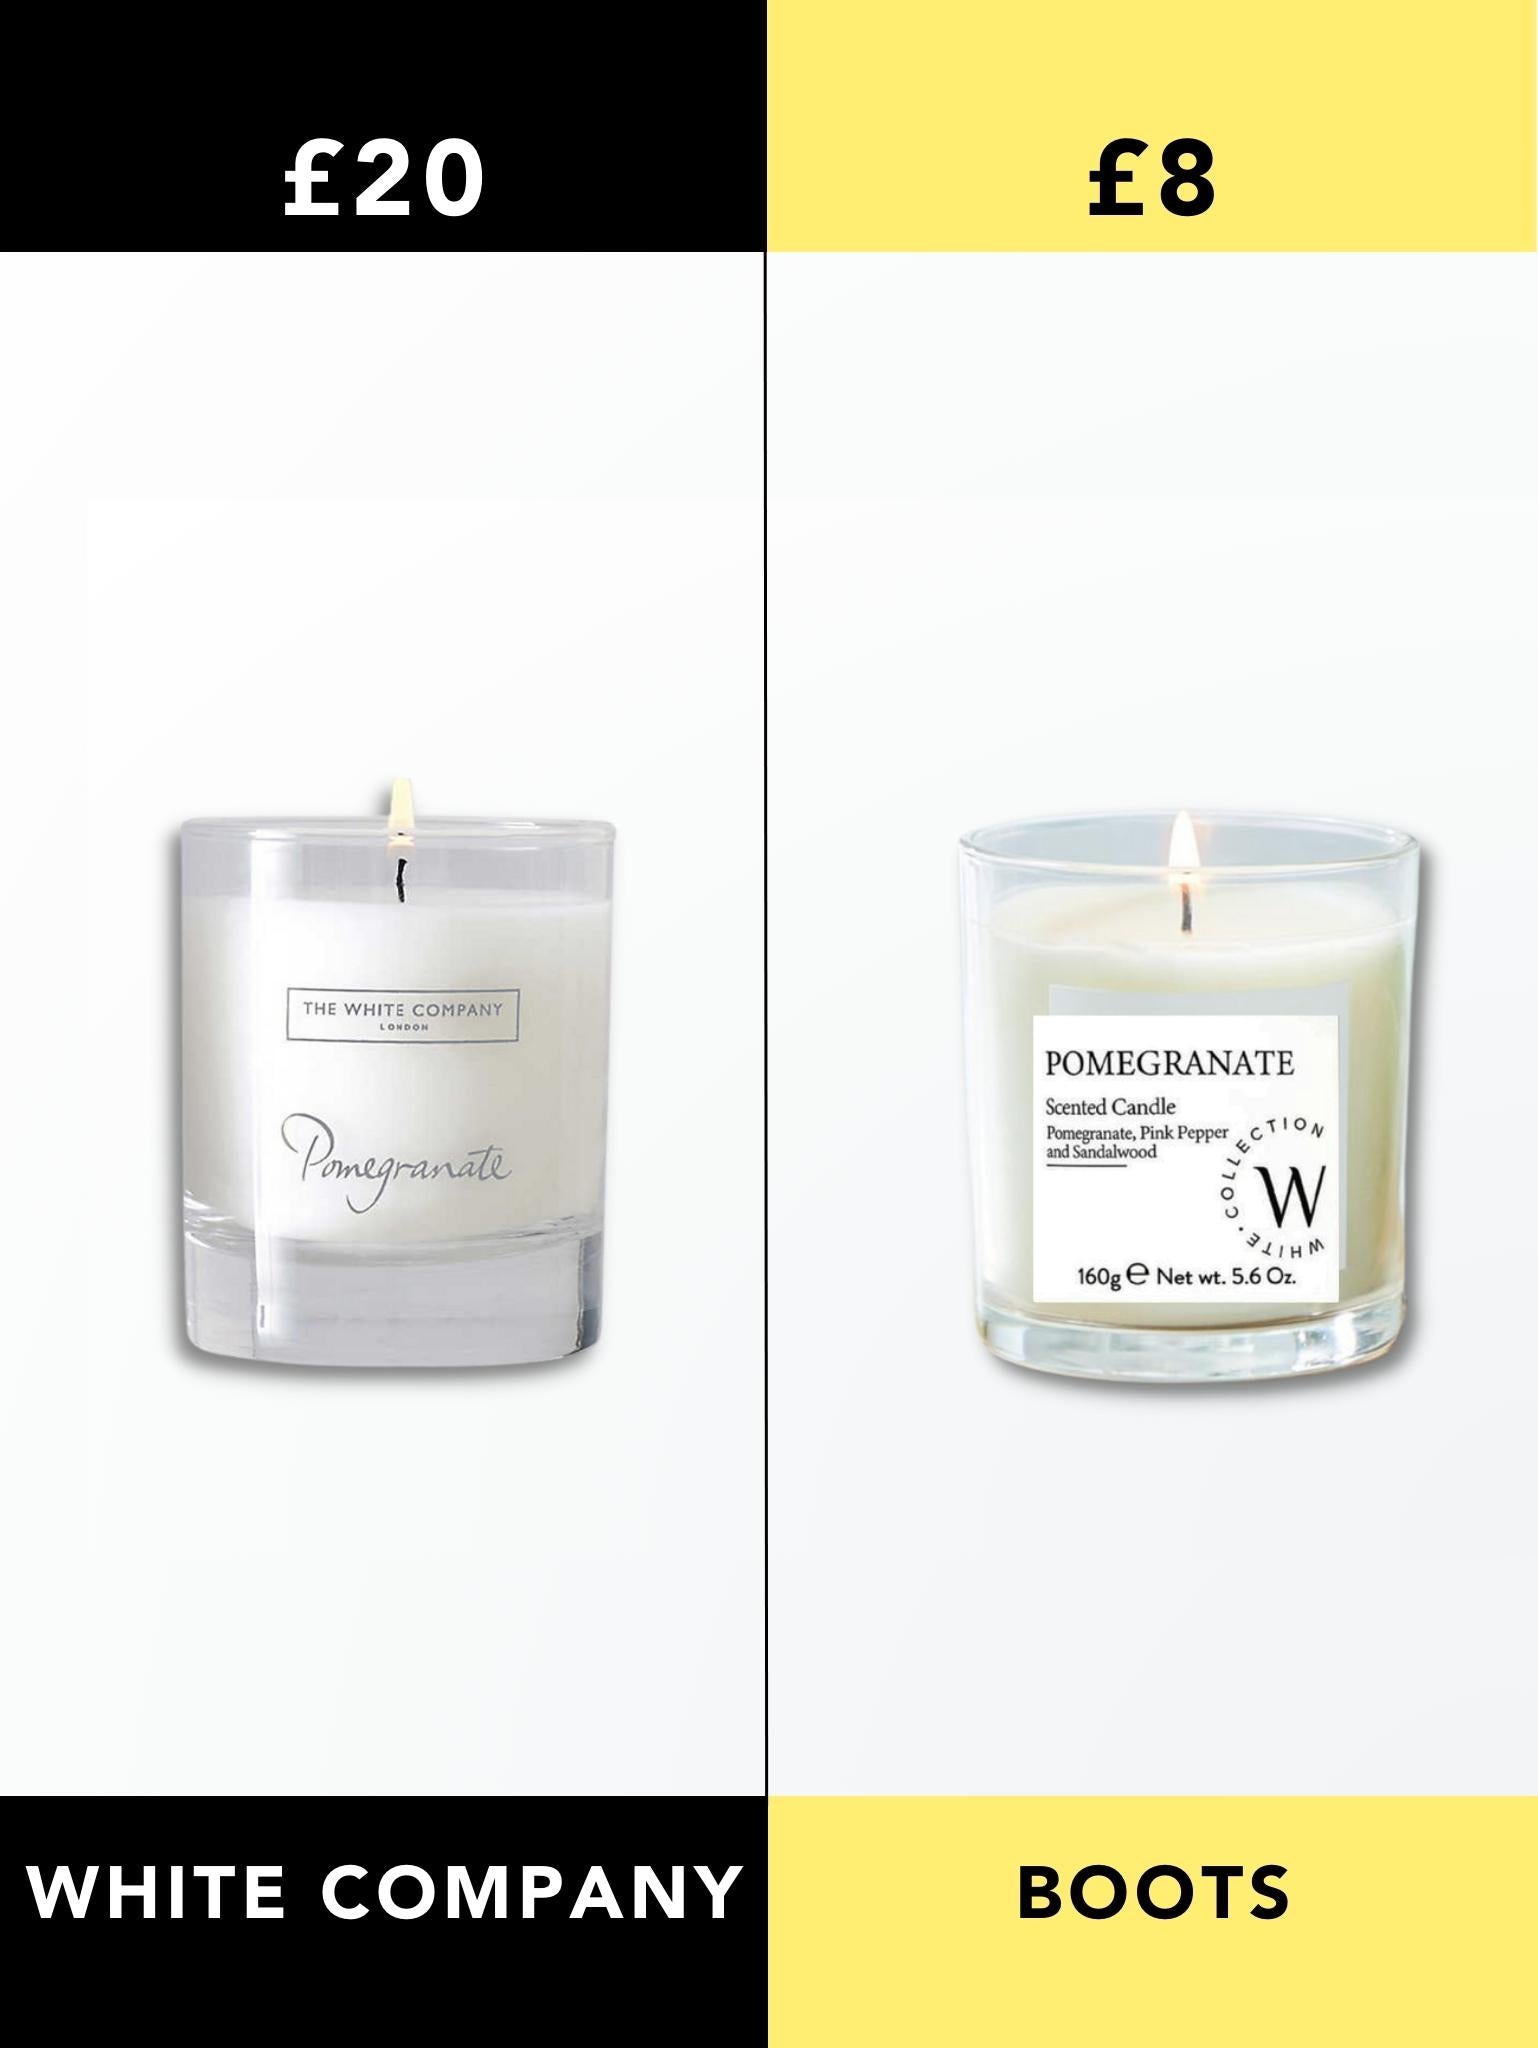 White Company Pomegranate Candle vs Boots Candle